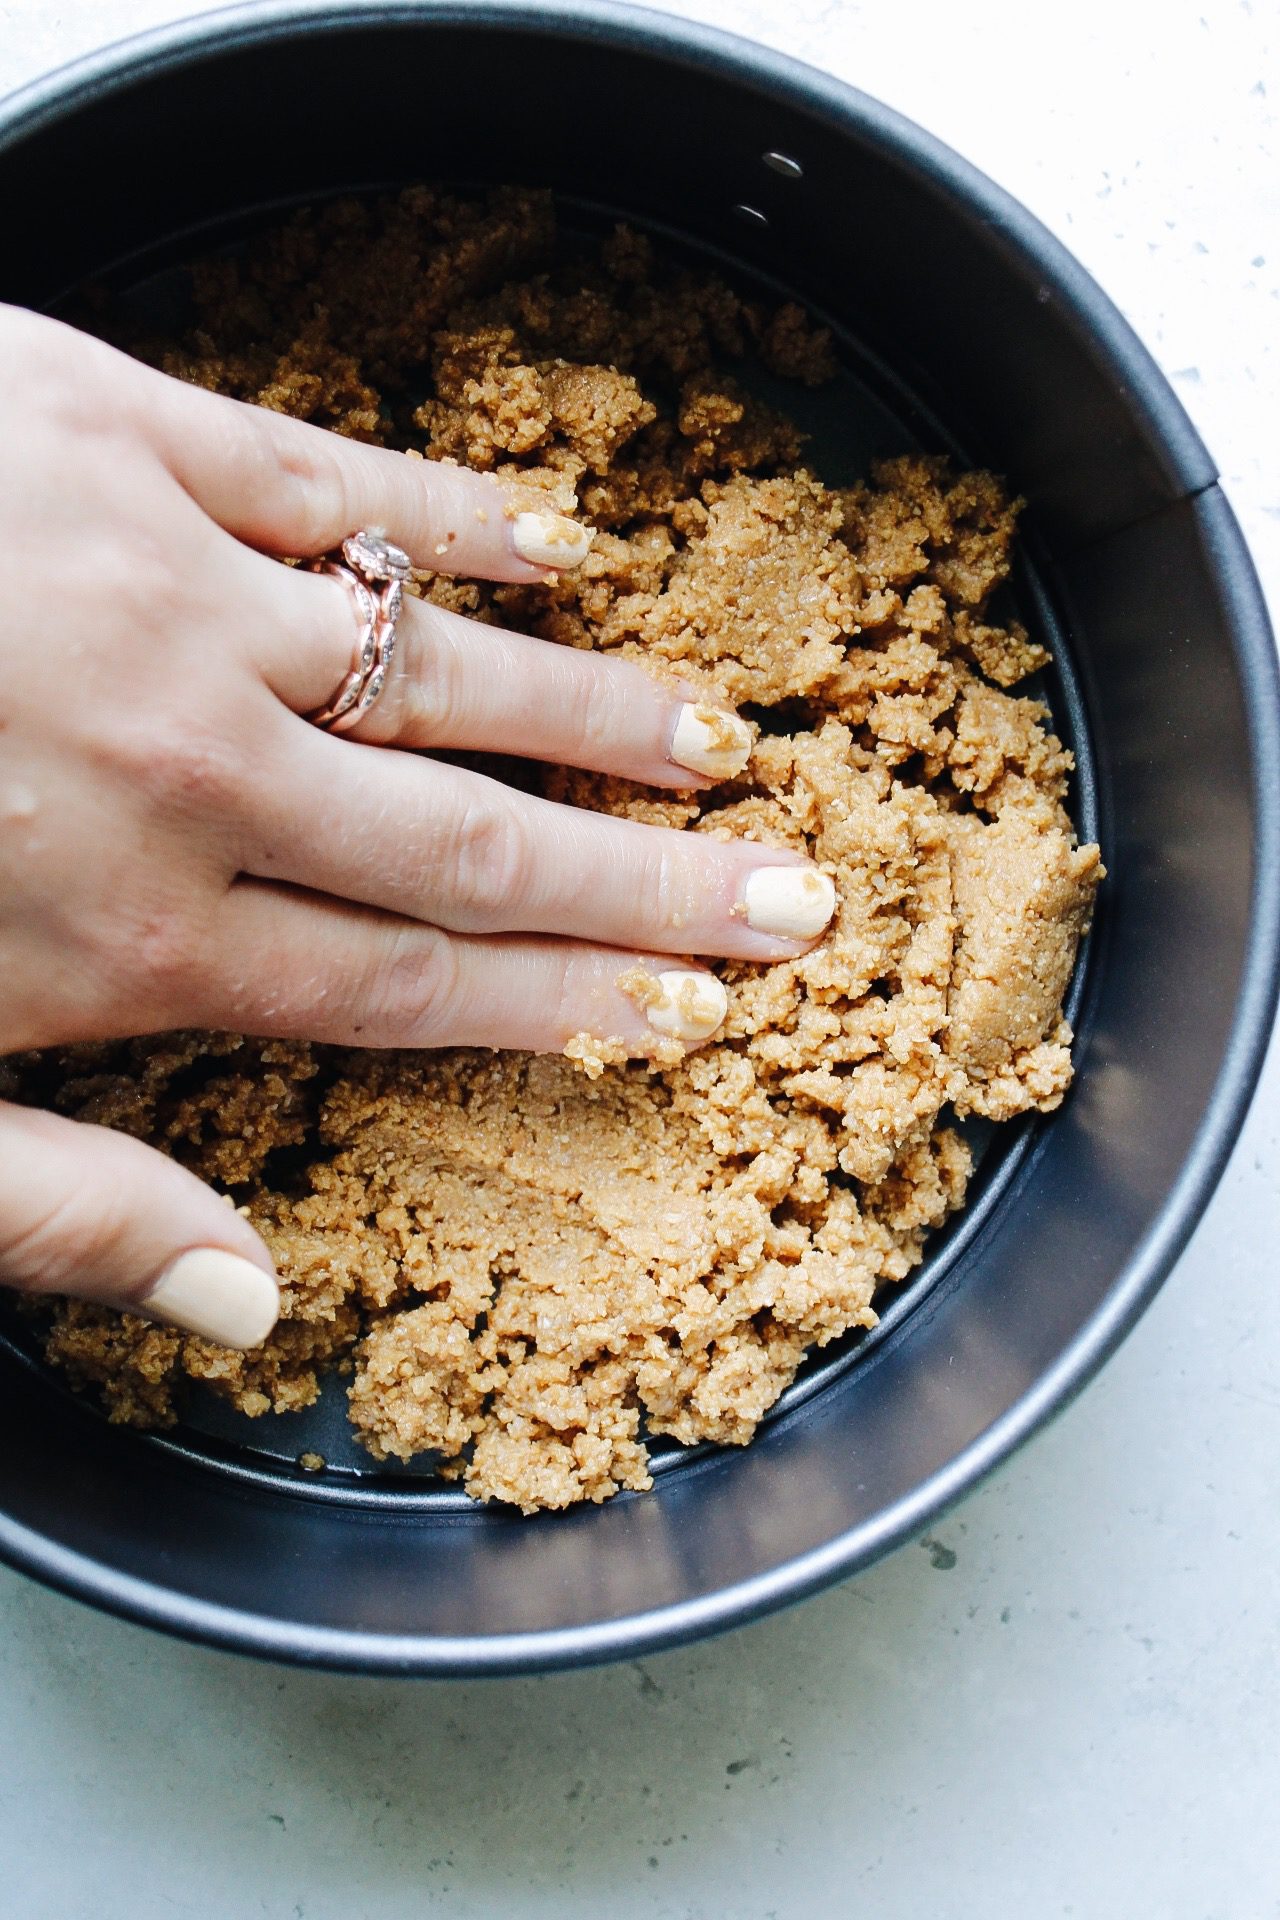 graham cracker crust being pressed into a springform pan